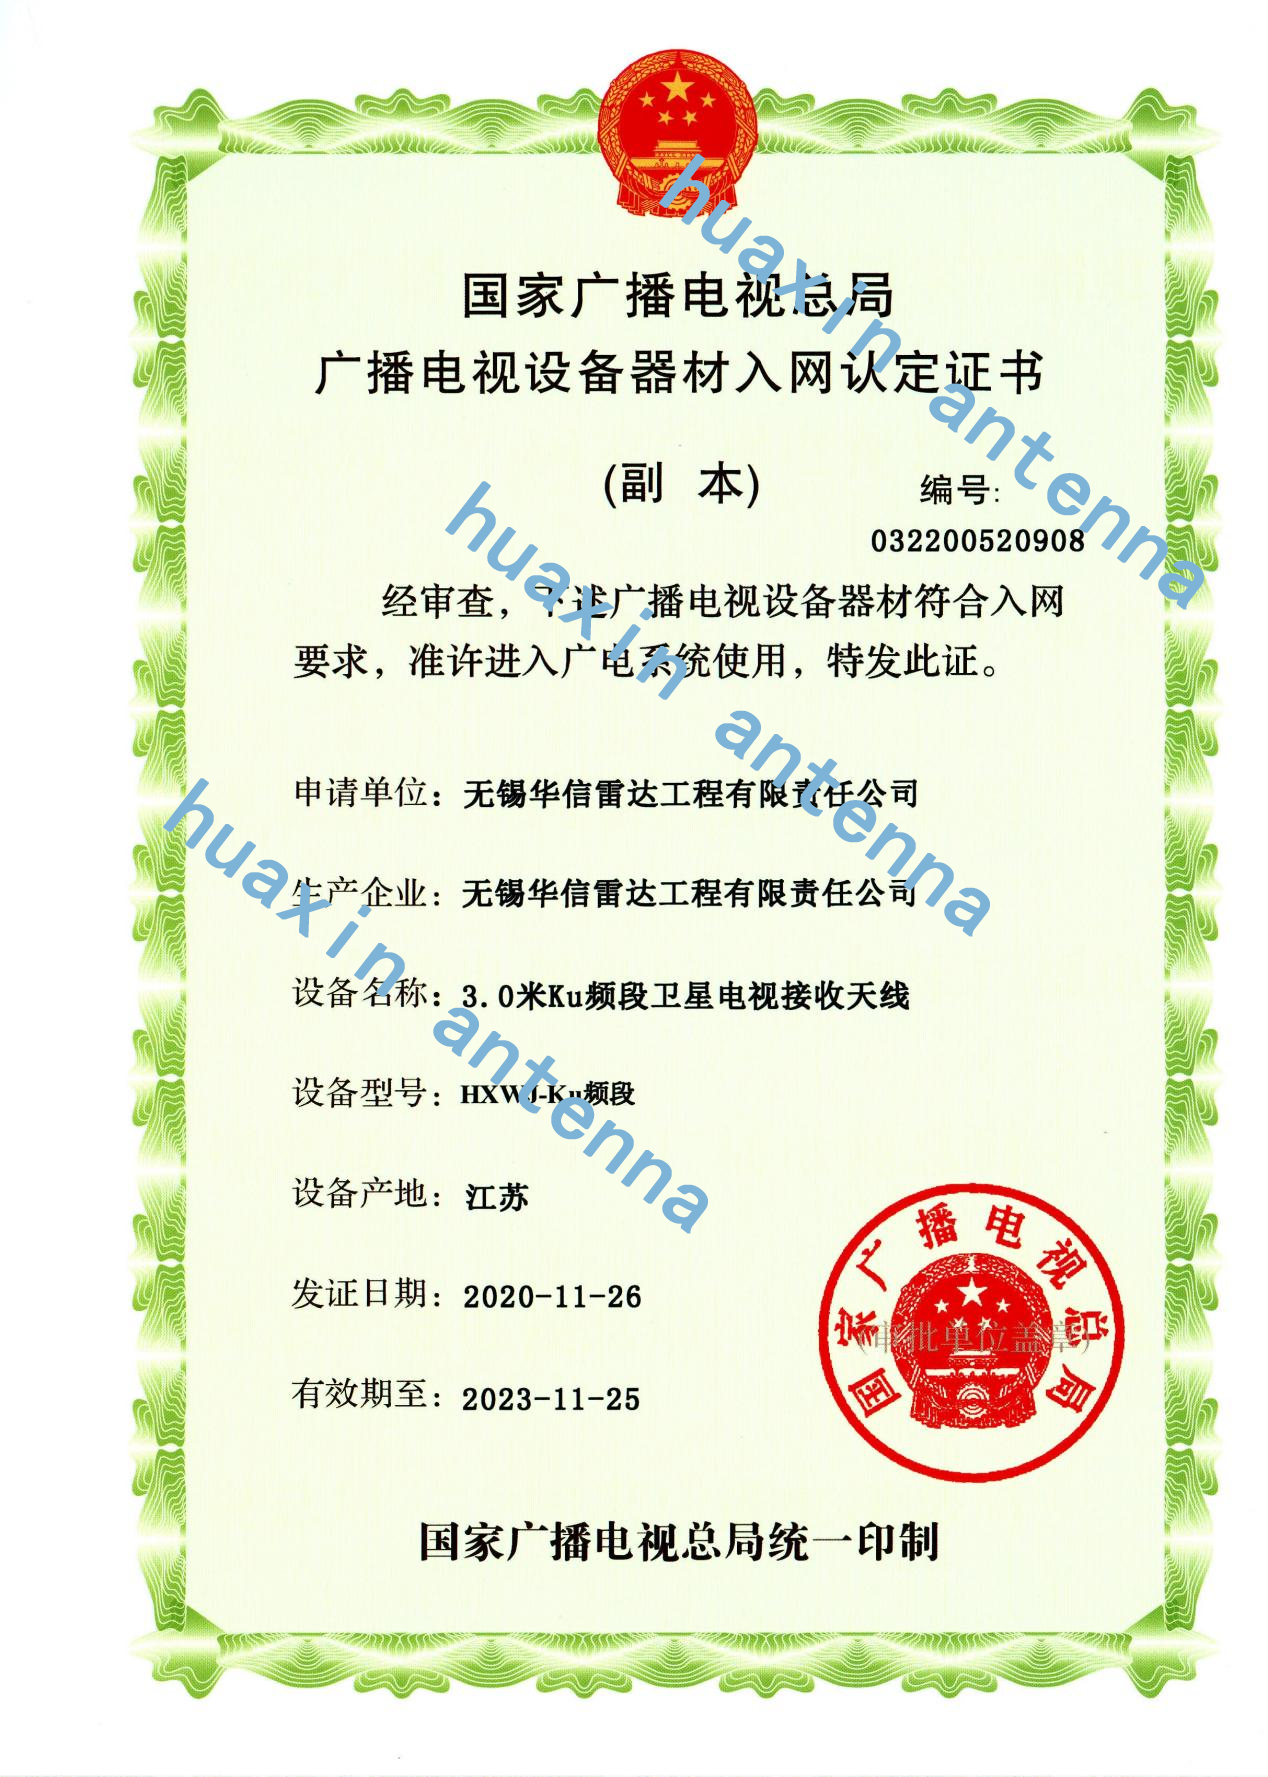 Certificate of Network Access for Broadcast Equipment